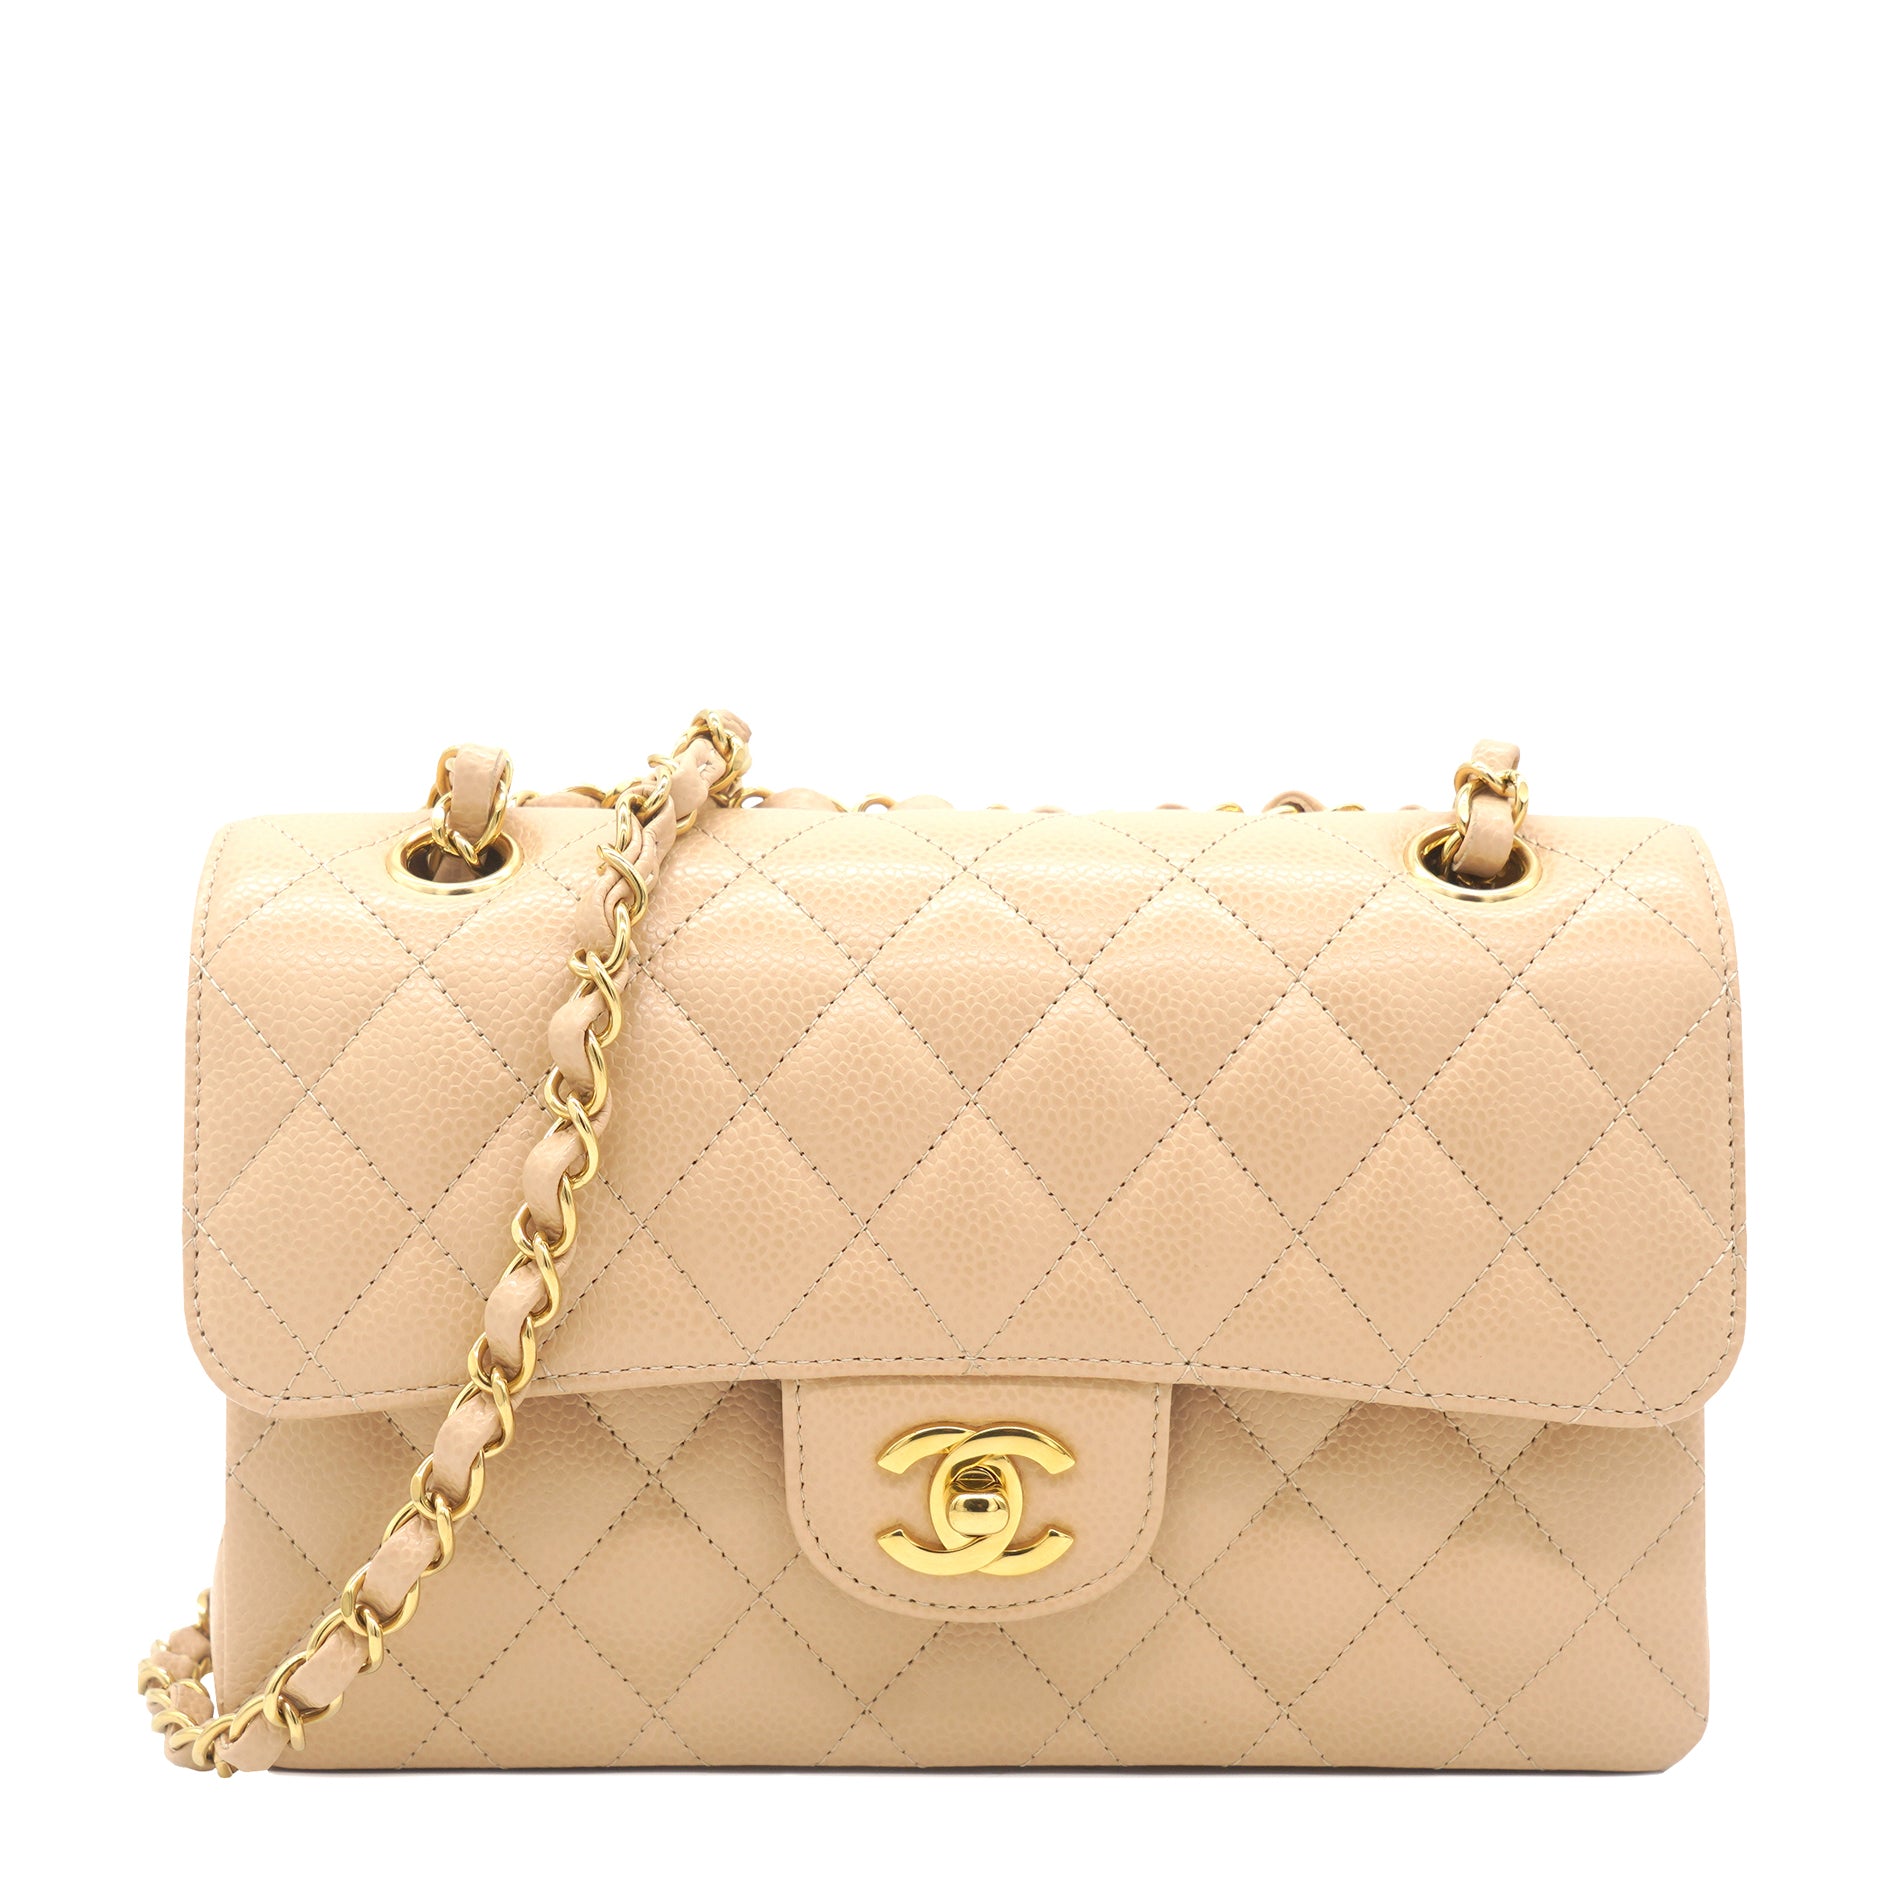 Chanel Two Tone Bag Authentic 100%